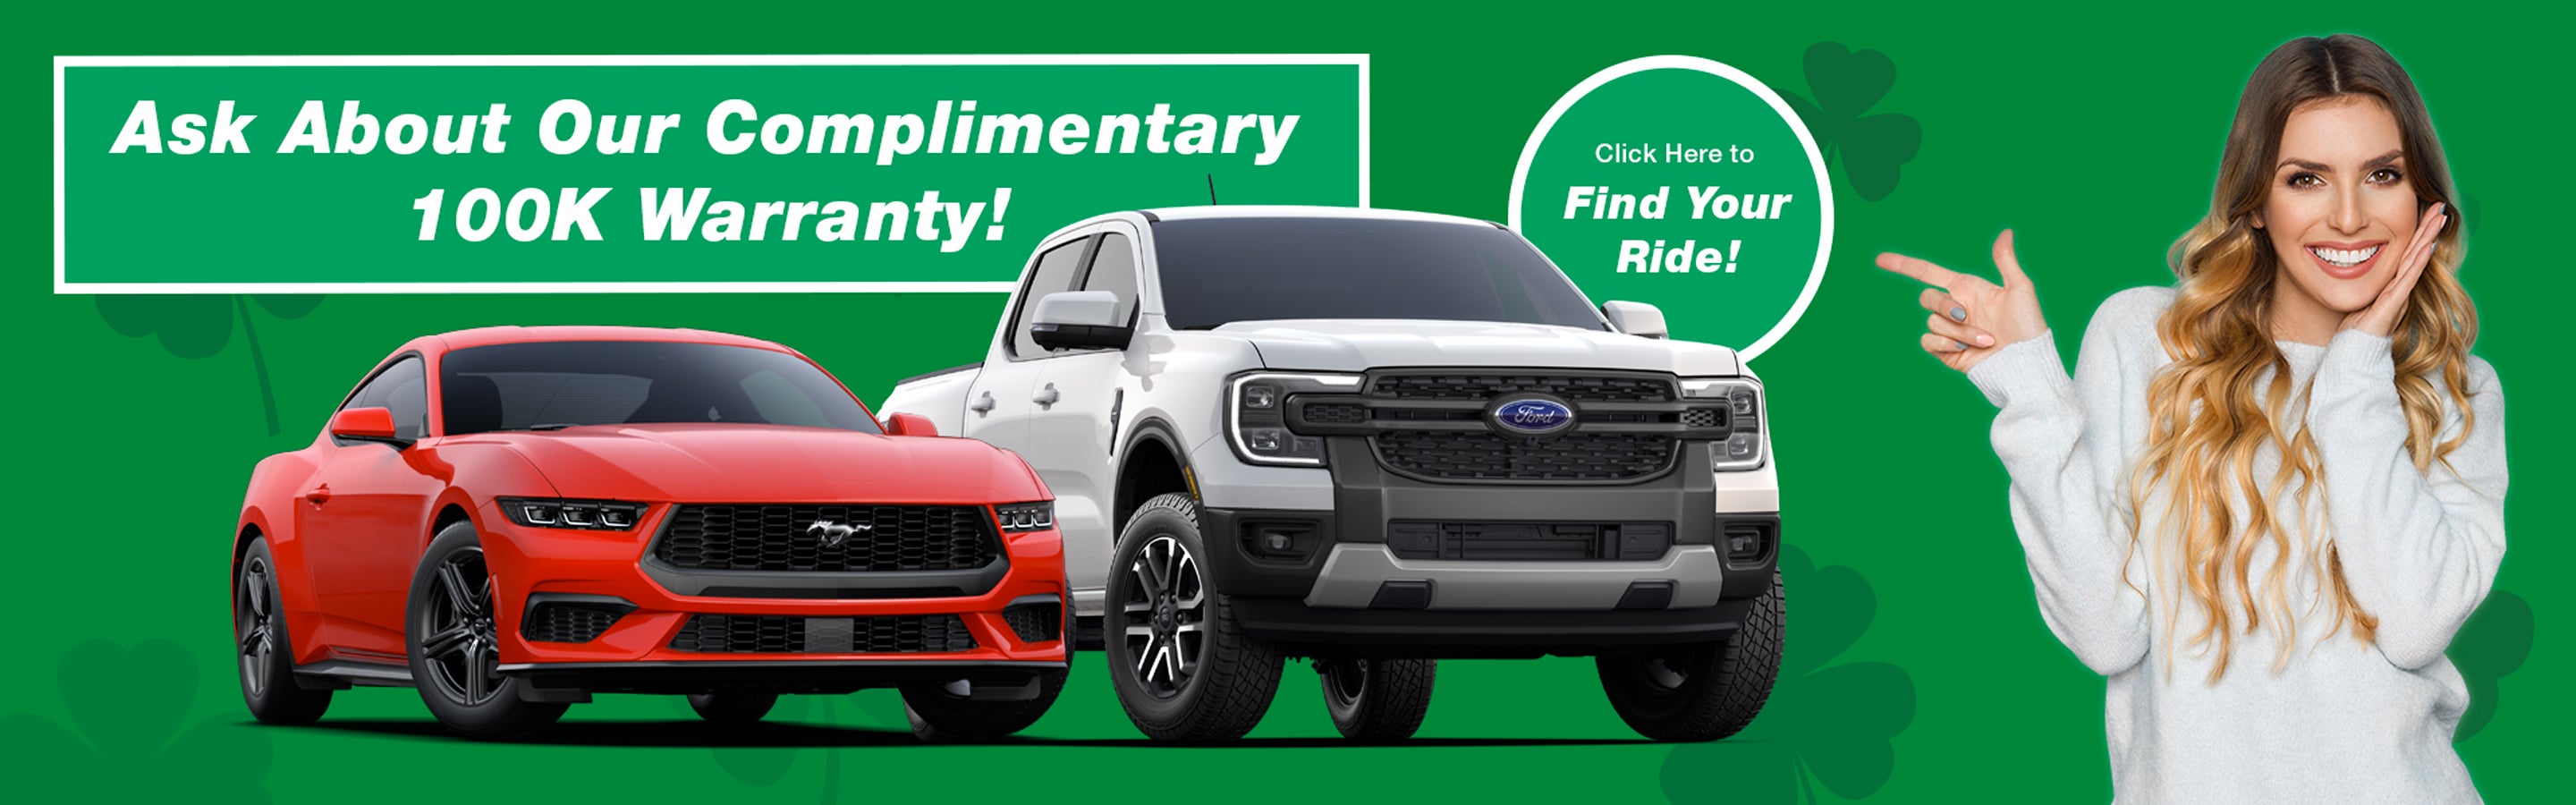 Ask about our complimentary 100,000 mile powertrain warranty